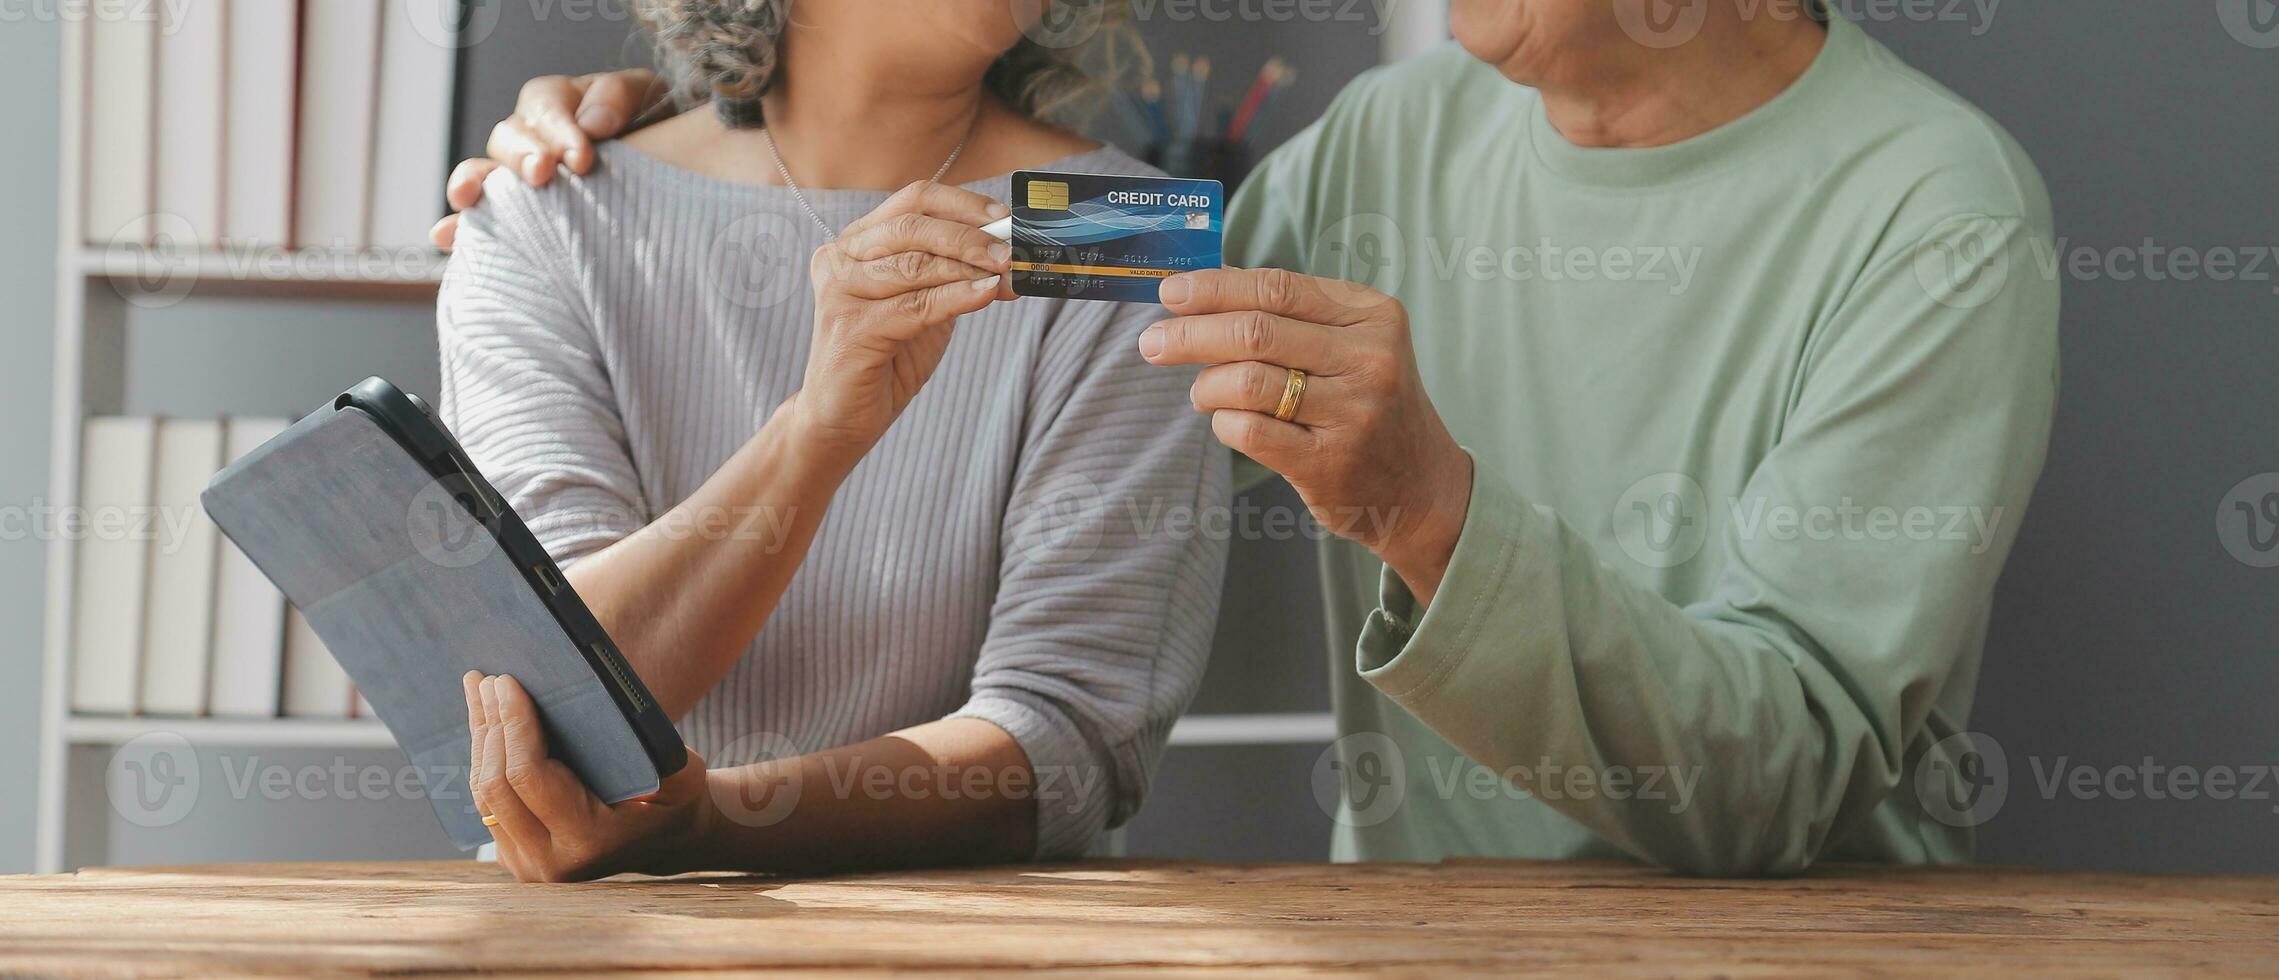 Close up mature man holding plastic credit card, senior couple family paying online, using laptop, satisfied older customers making secure internet payment, shopping, browsing banking service photo